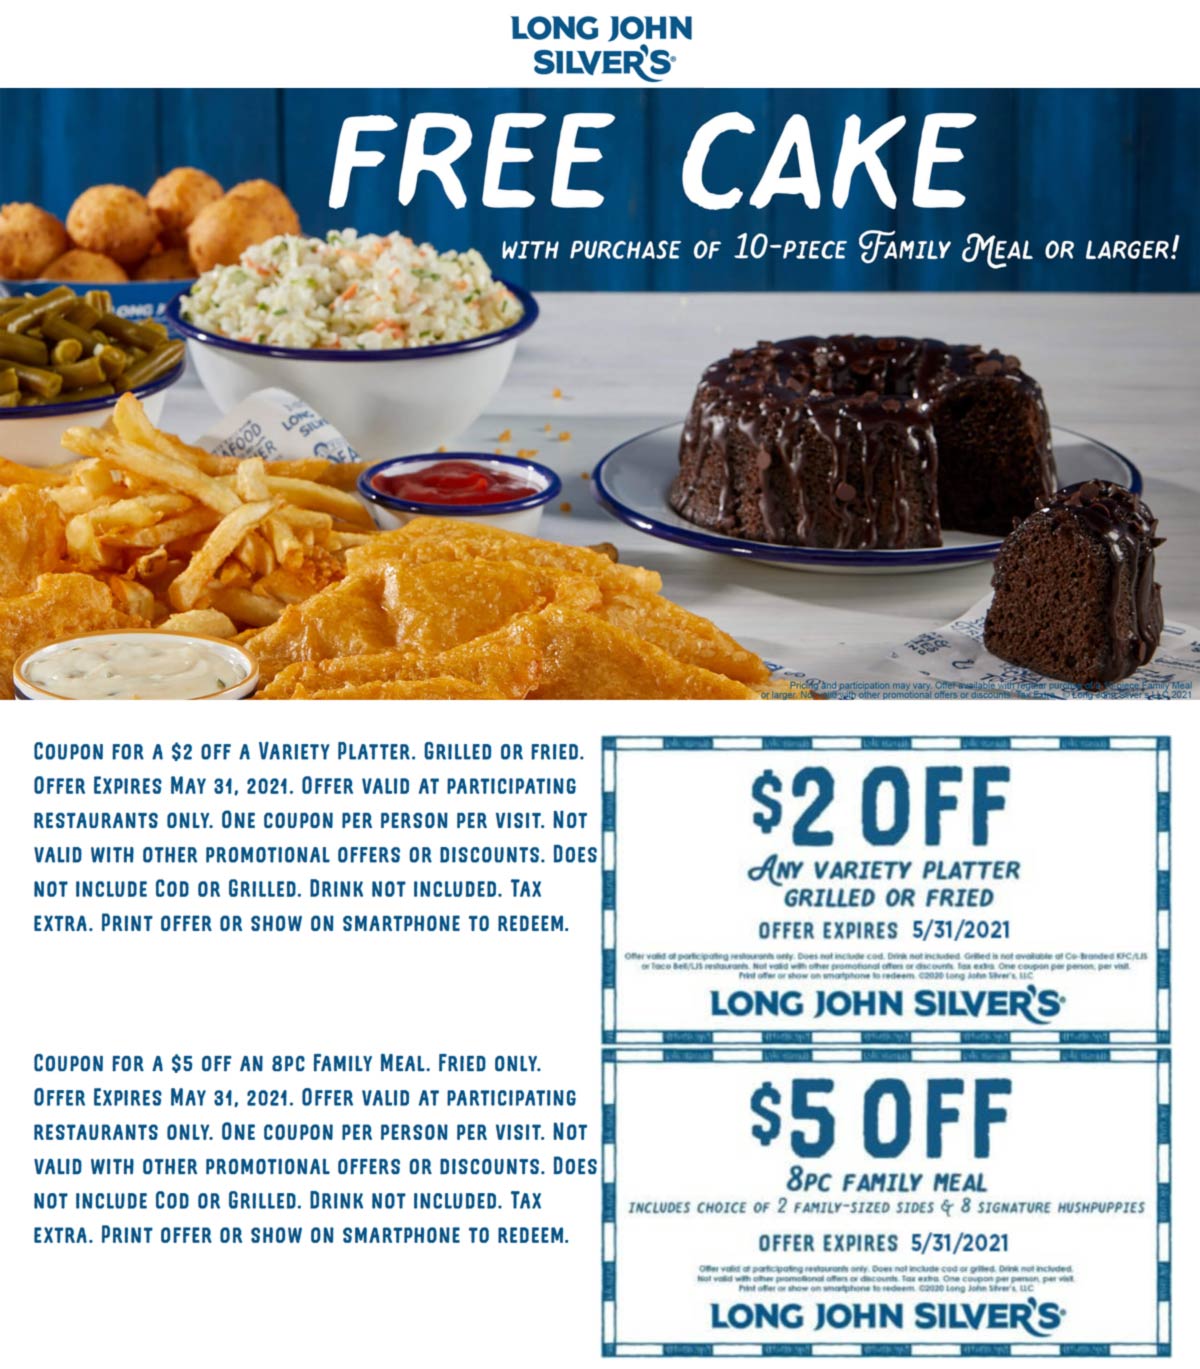 Long John Silvers restaurants Coupon  $2 off any variety platter & more at Long John Silvers restaurants #longjohnsilvers 